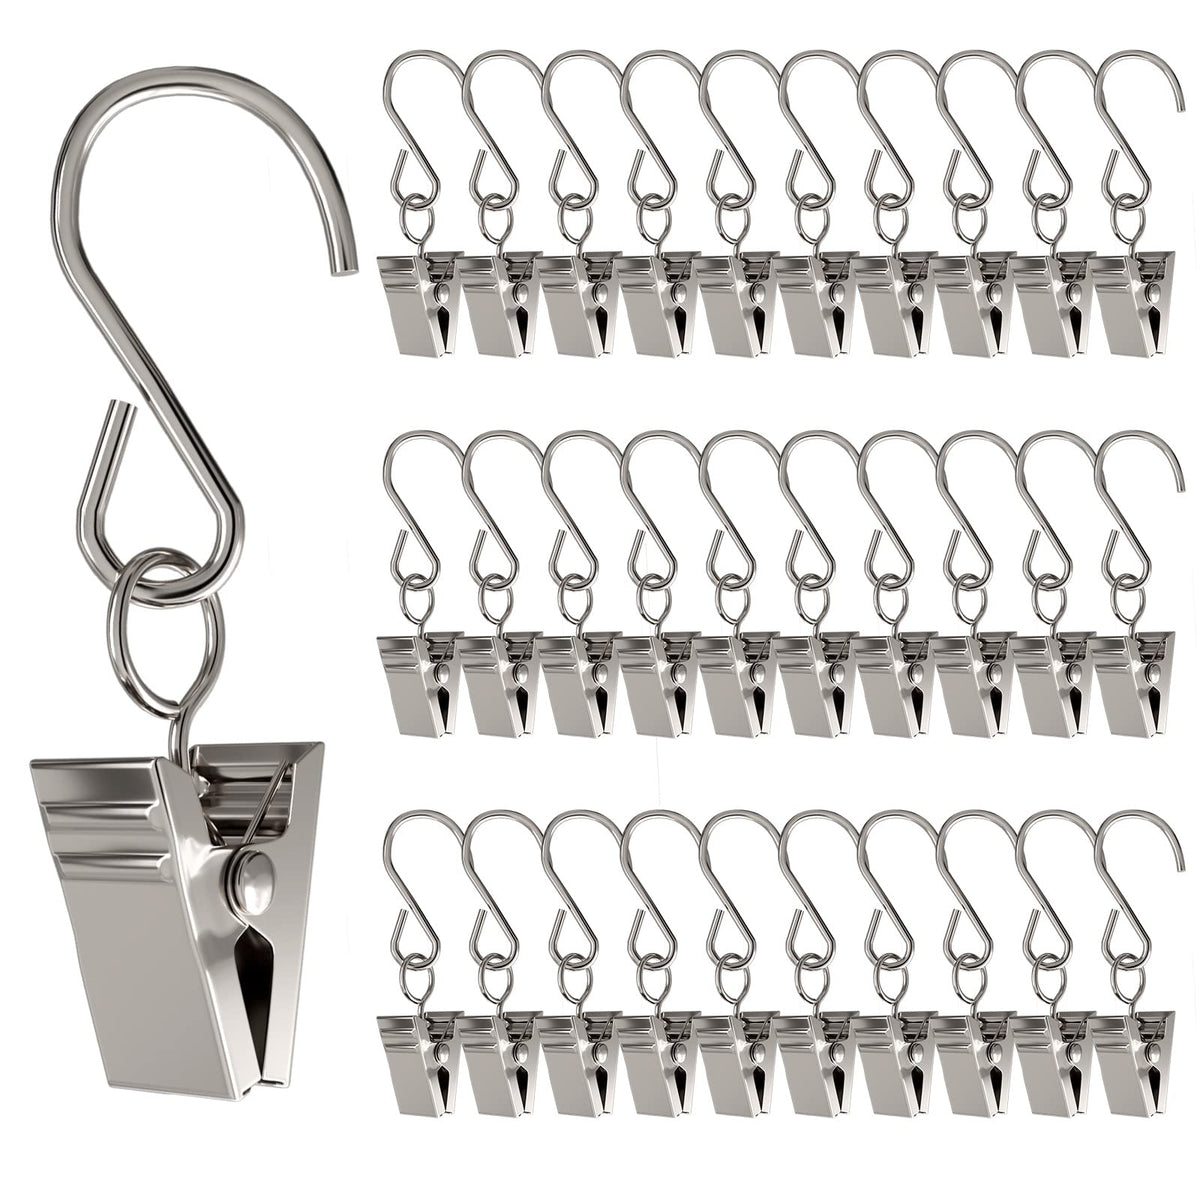 vshougou 32pcs Curtain Clips with S Hooks,Hanger Clips,Tapestry Hangers